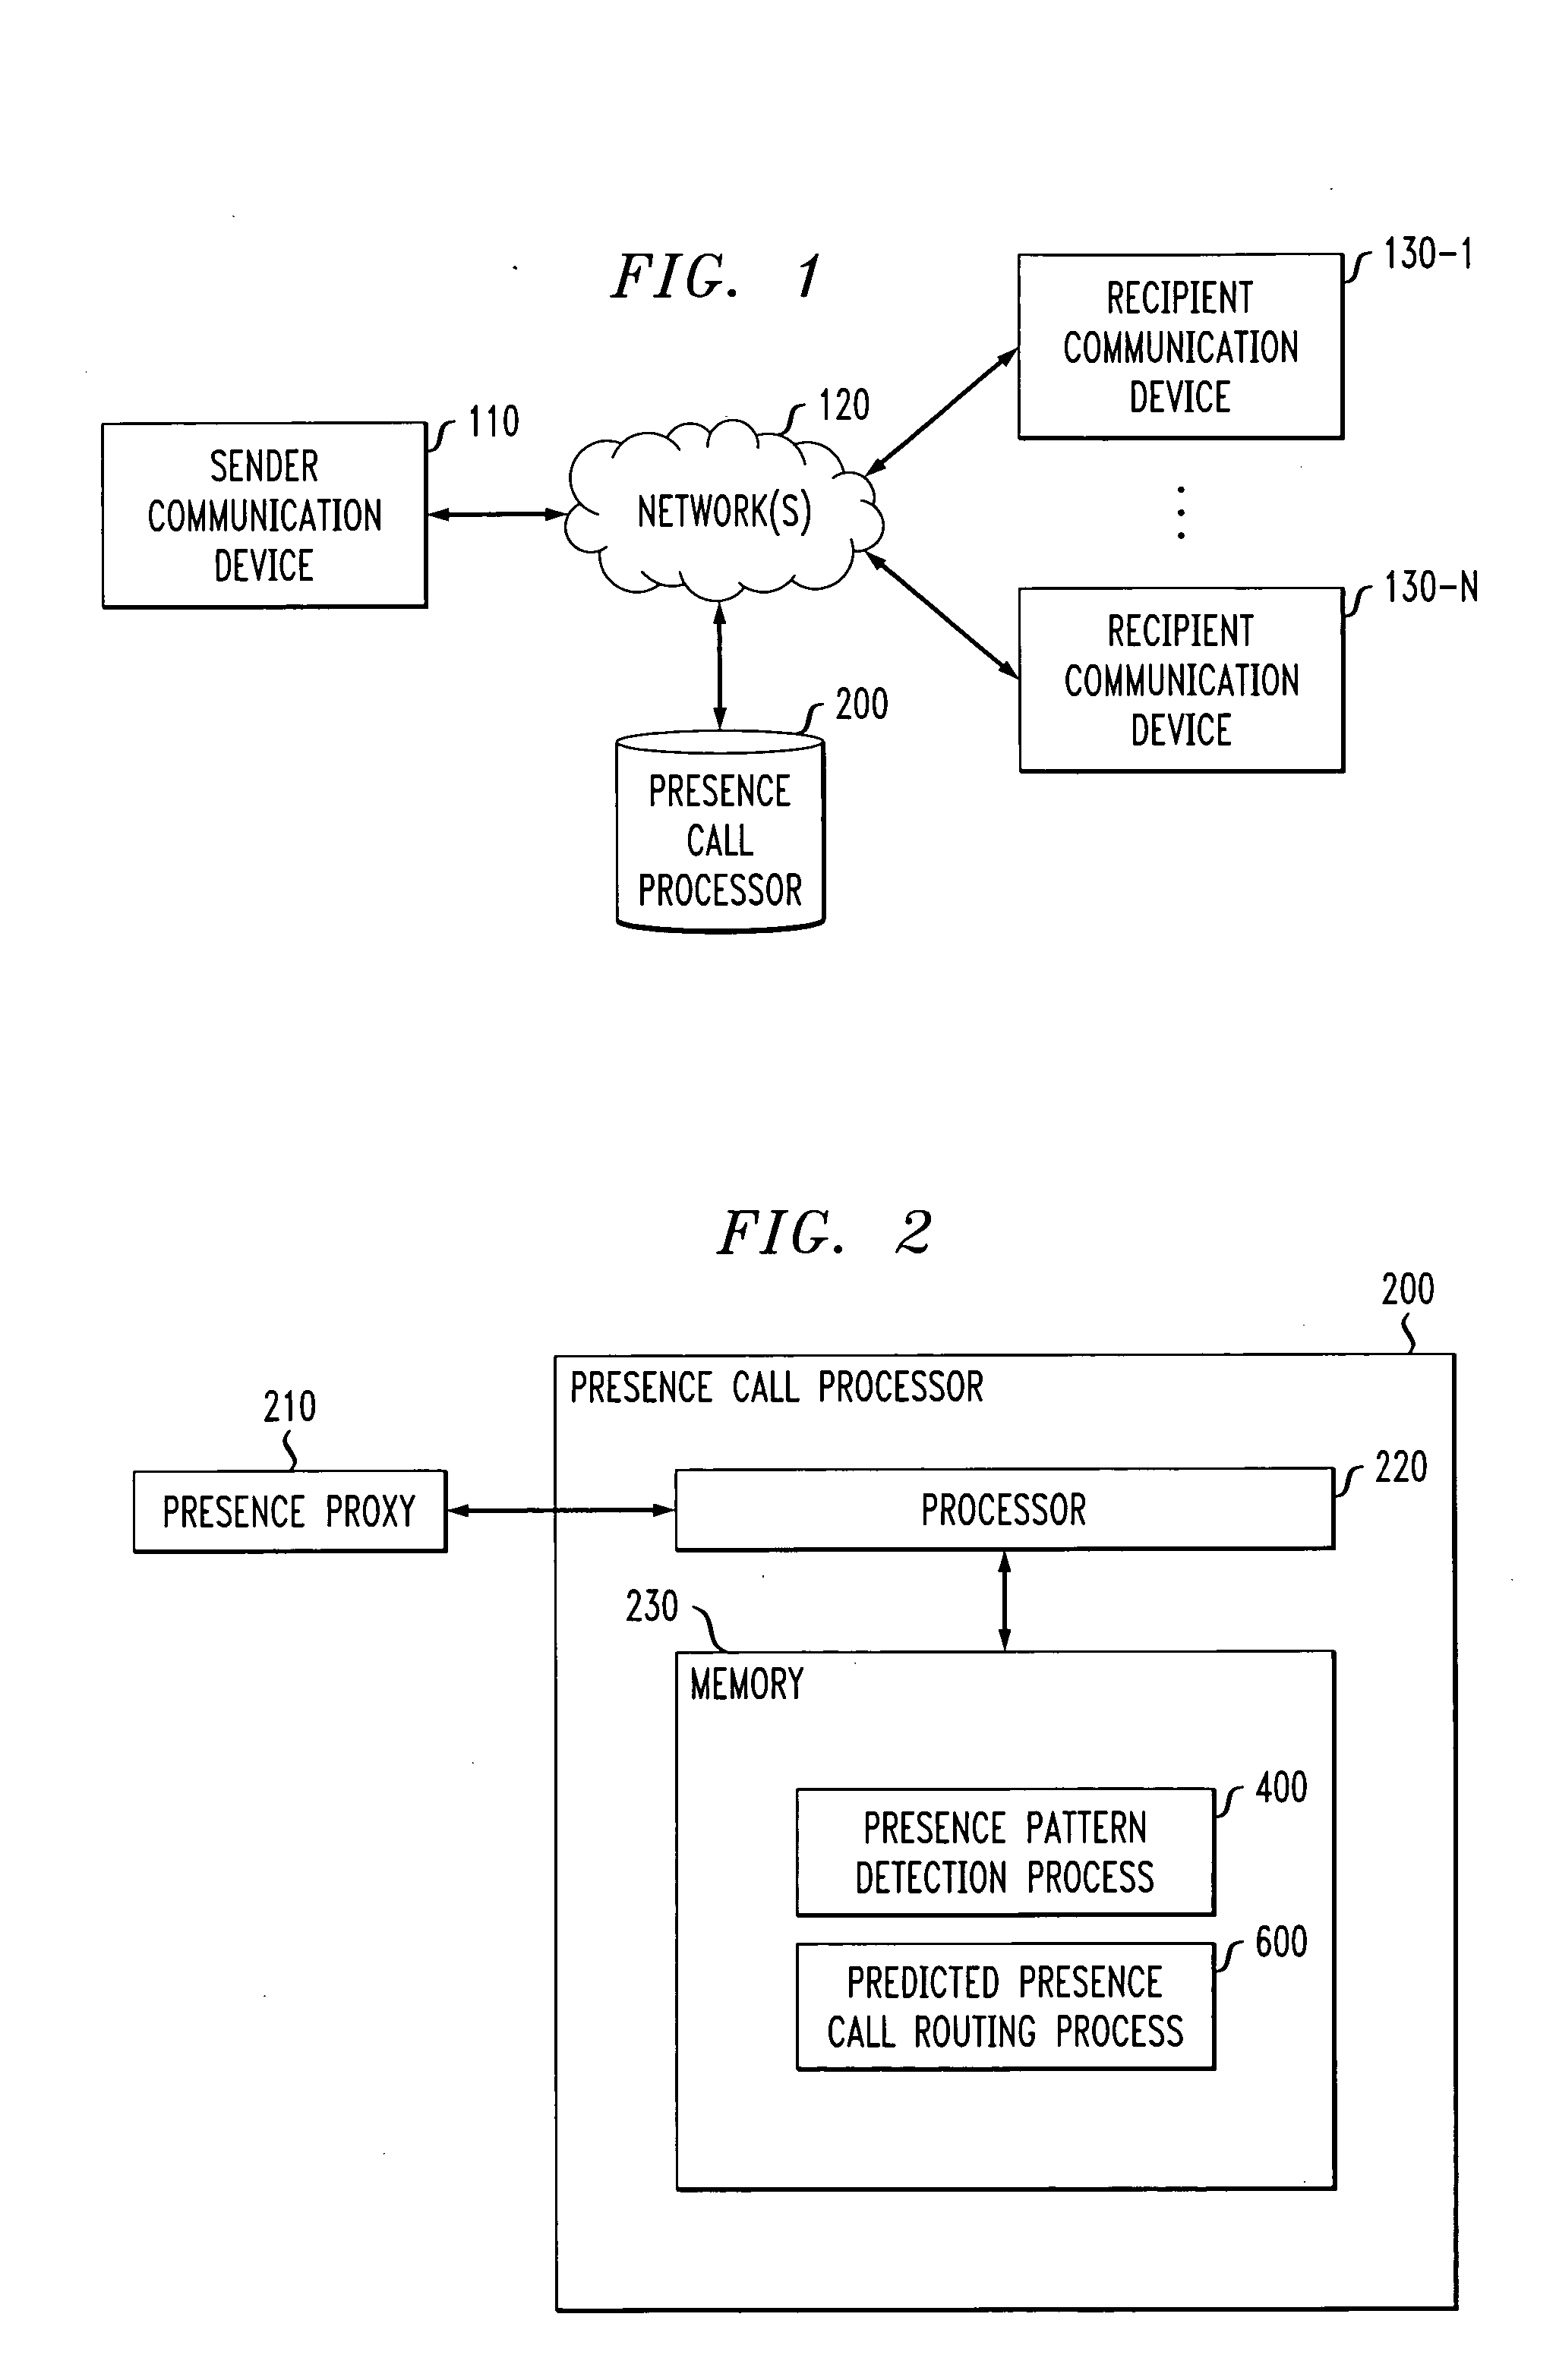 Method and apparatus for routing a communication to a user based on a predicted presence